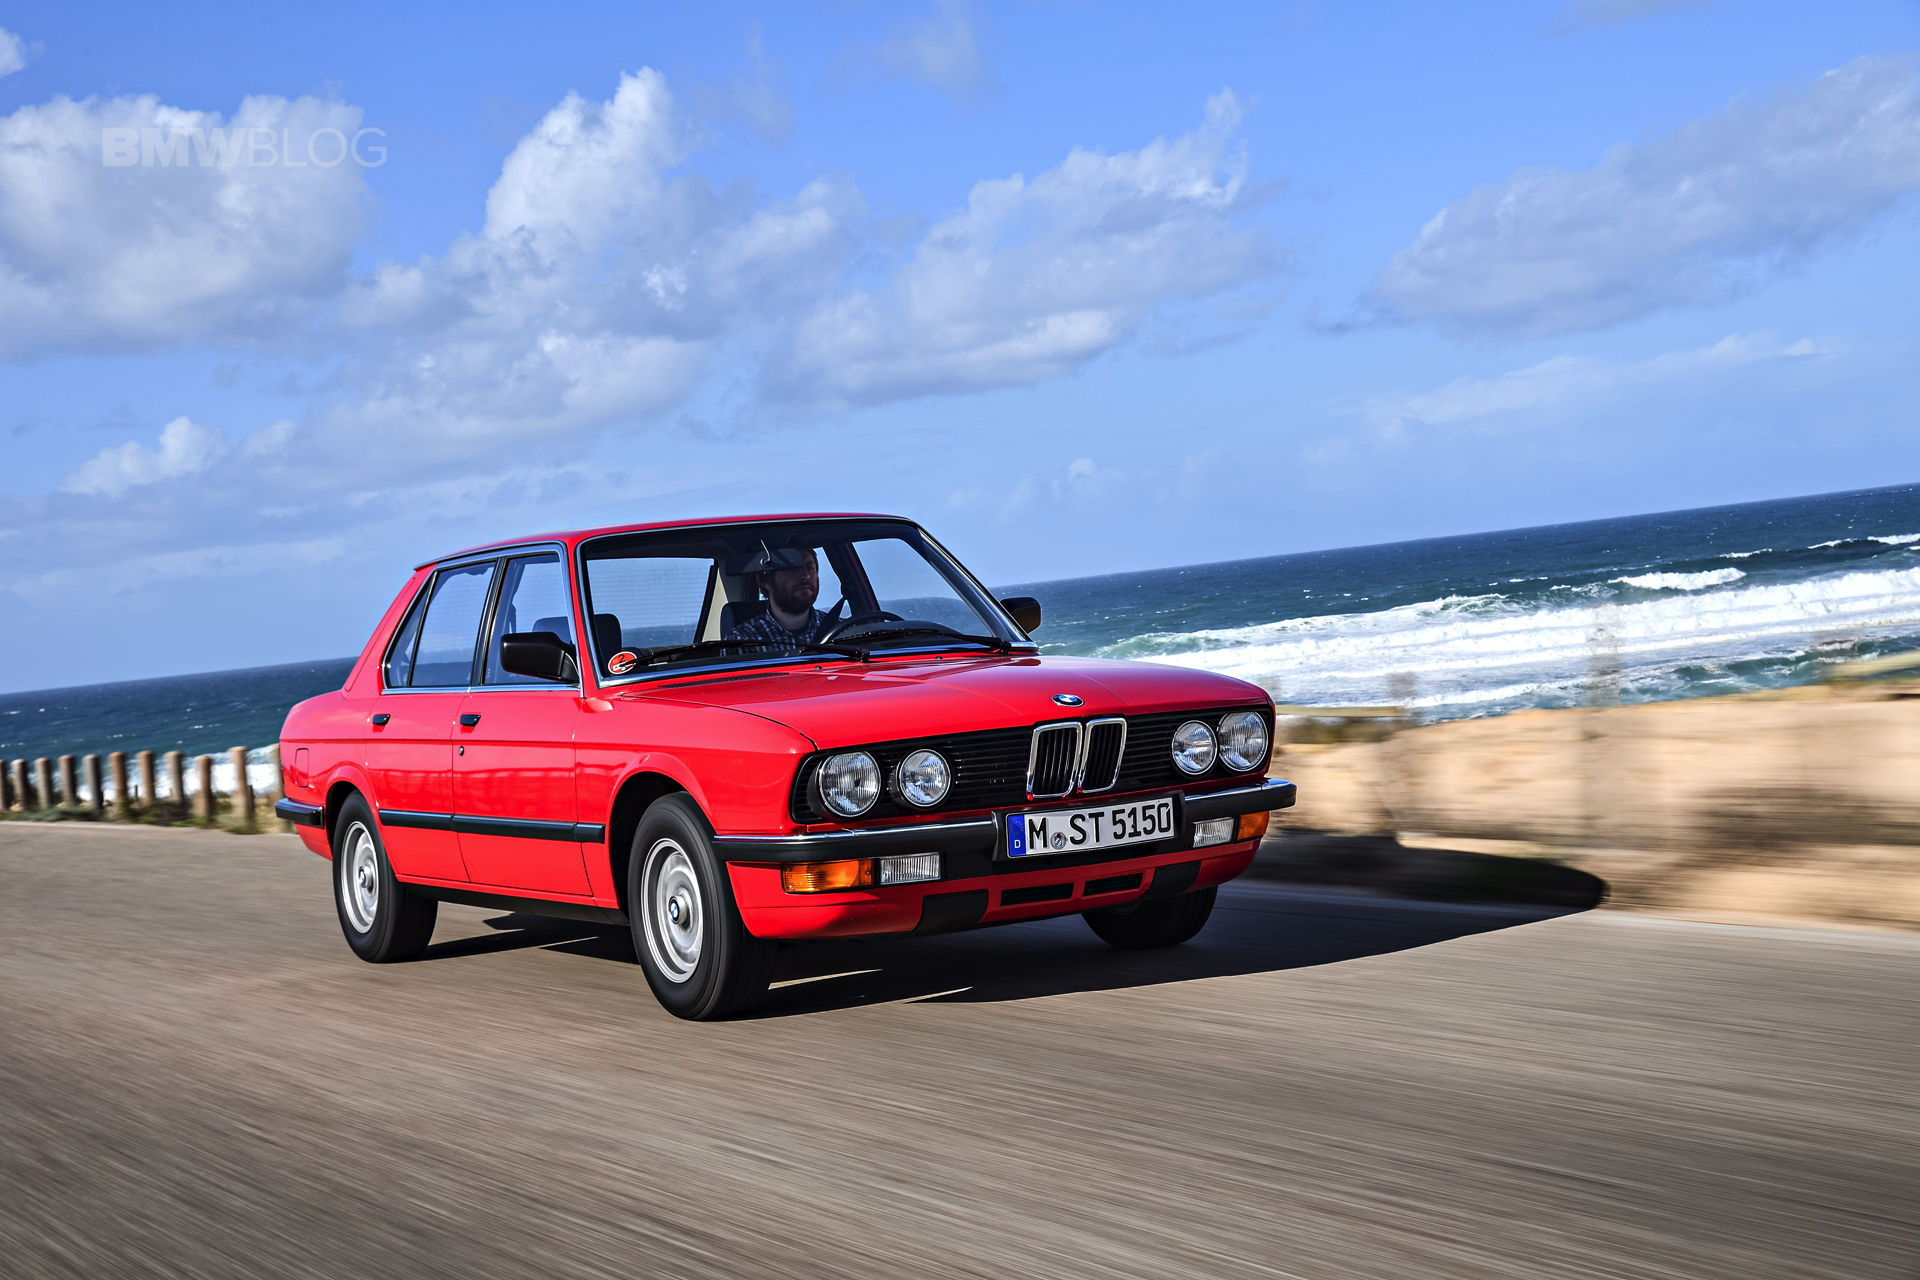 BMW 5 Series History - The 2nd Generation (E28)